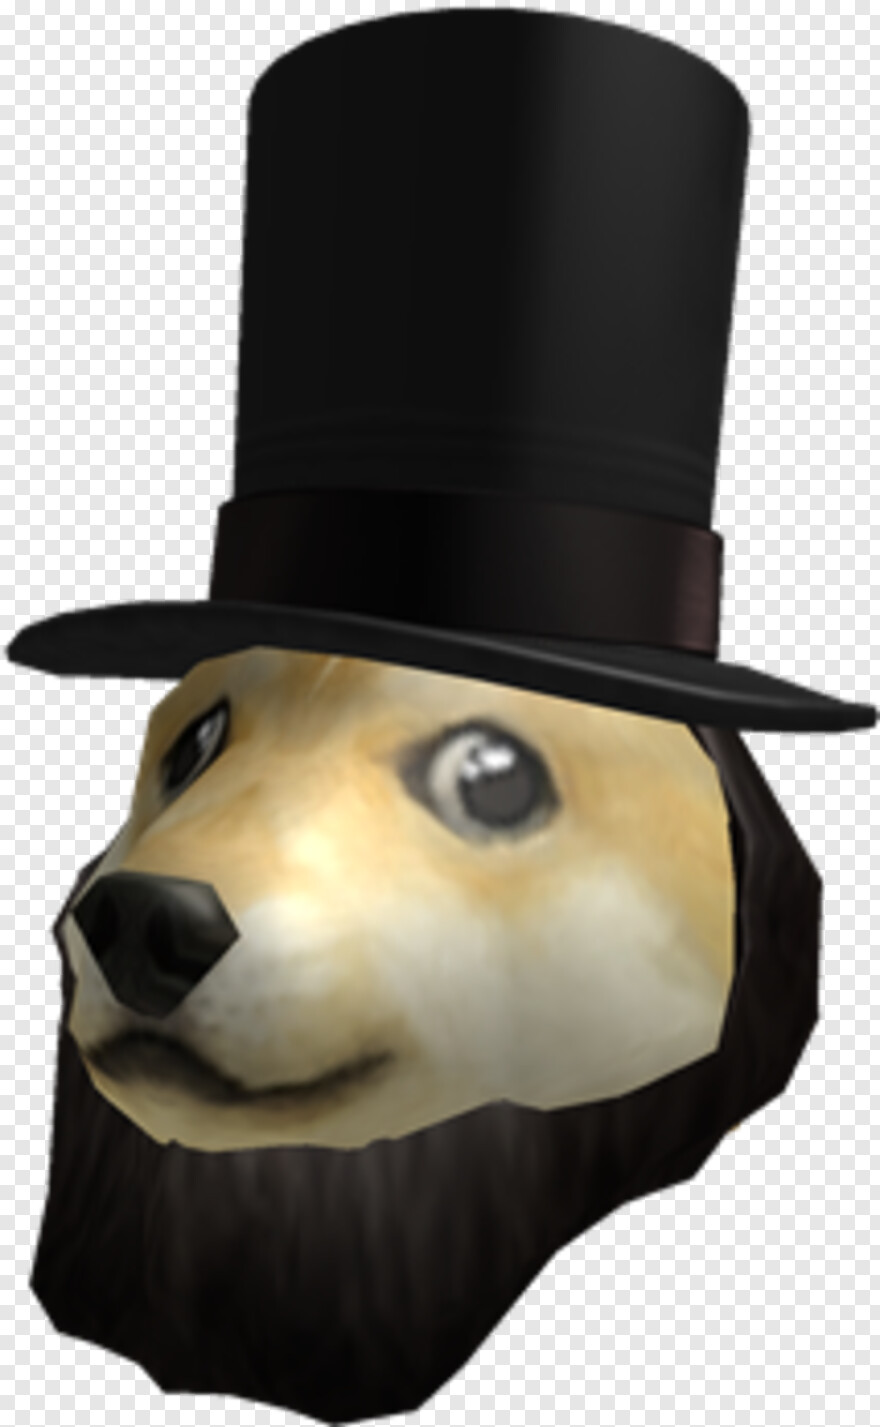 Doge Head Husky Buy Now Button Artwork Doge Tumblr Stickers 501311 Free Icon Library - husky roblox hat